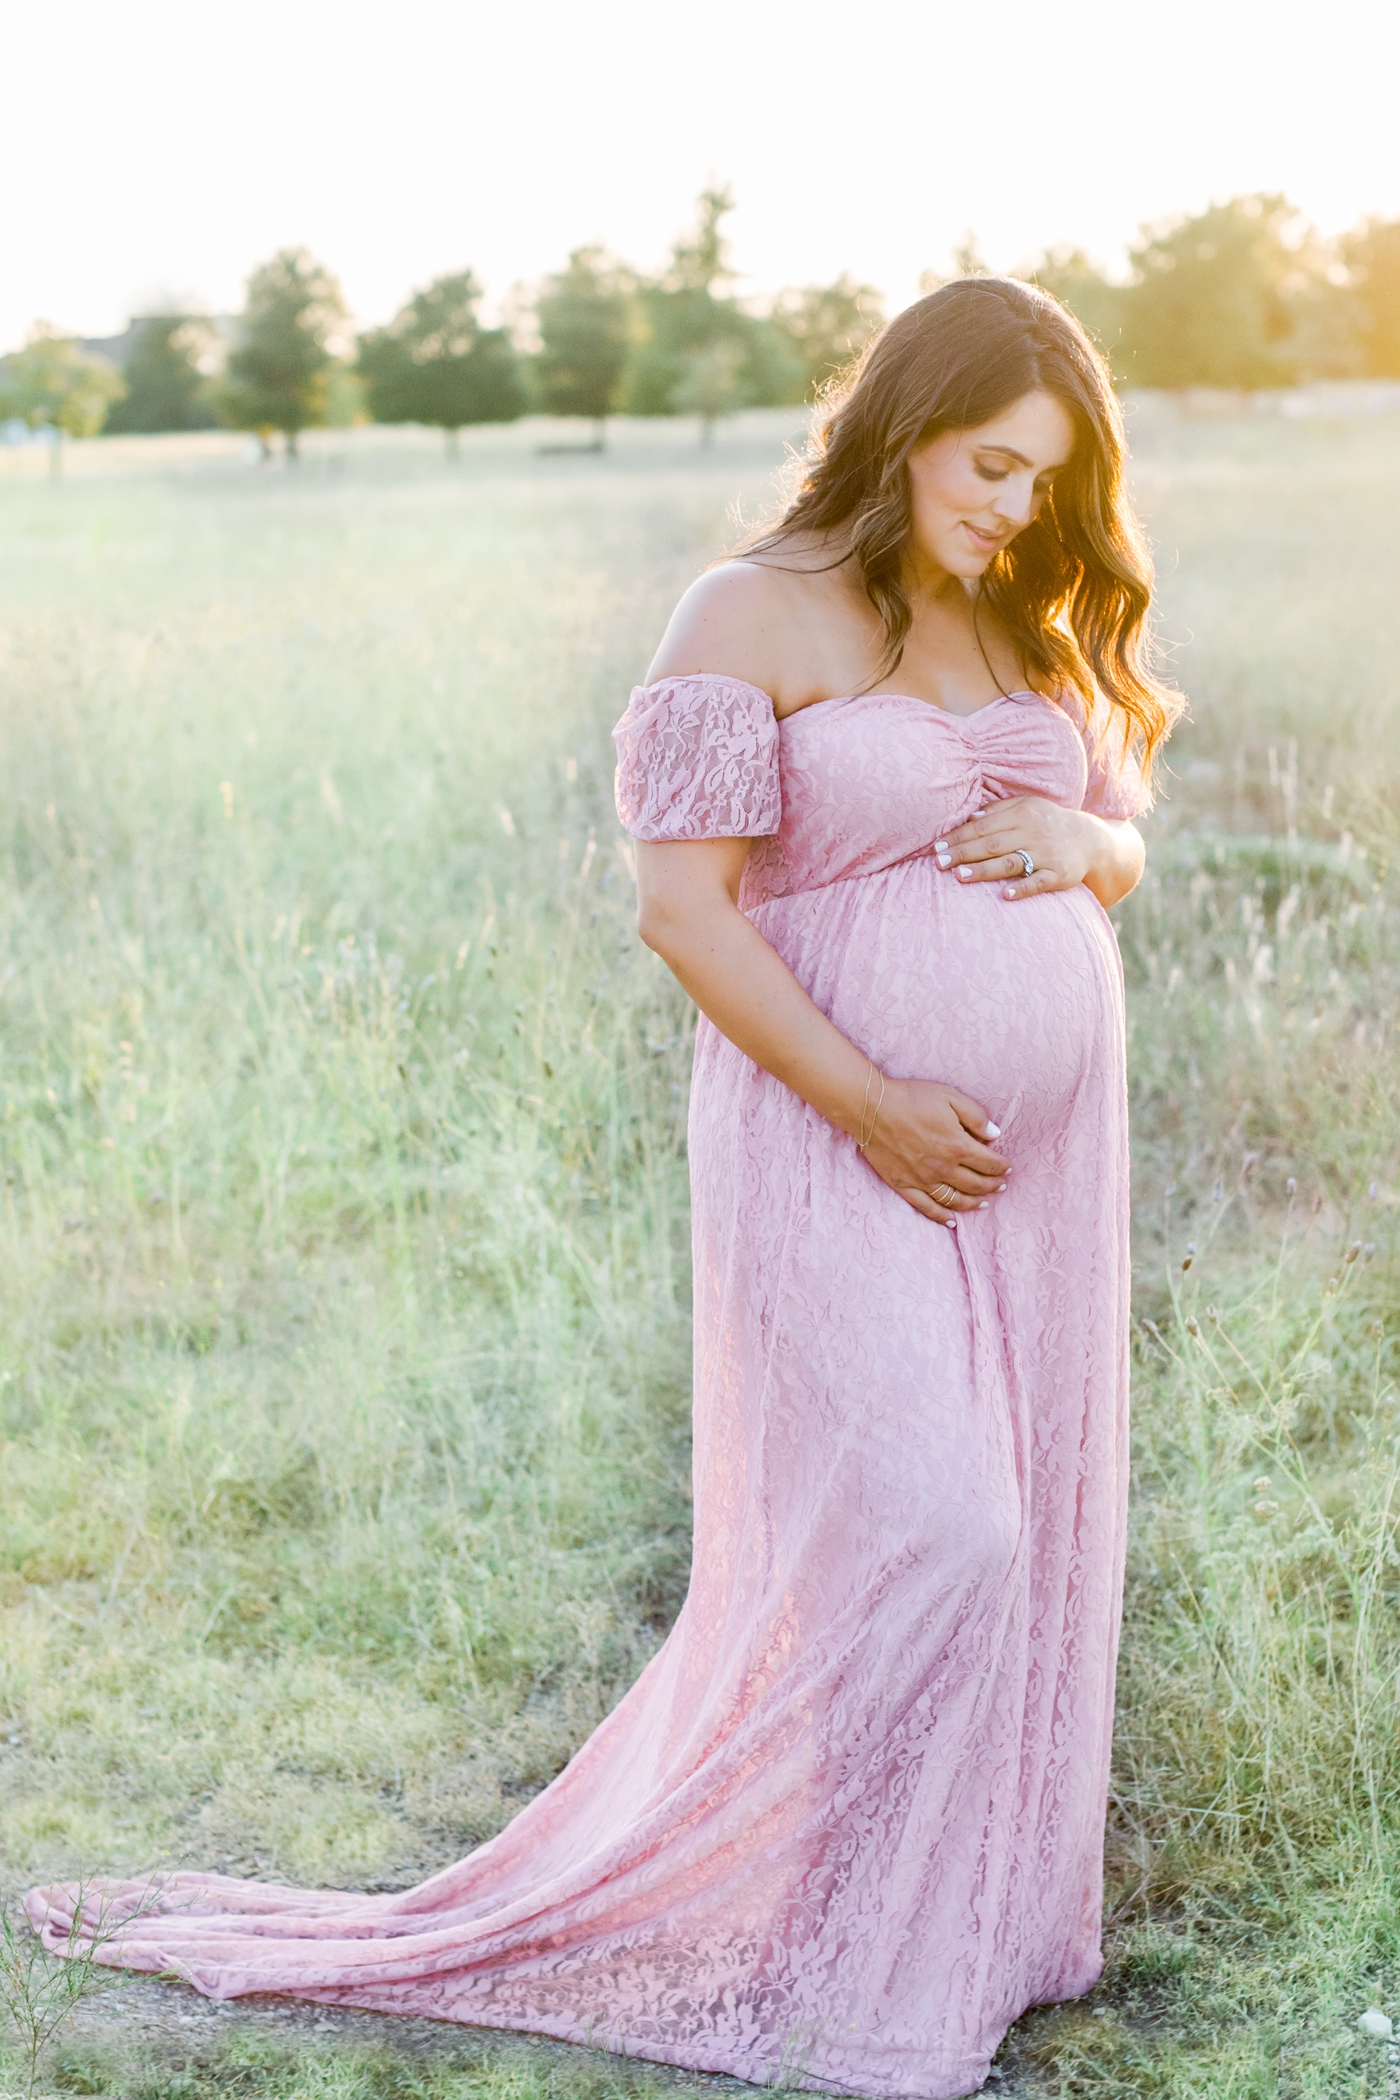 Sunset maternity session with Mom wearing pink lace maxi dress. Photo by Sana Ahmed Photography.